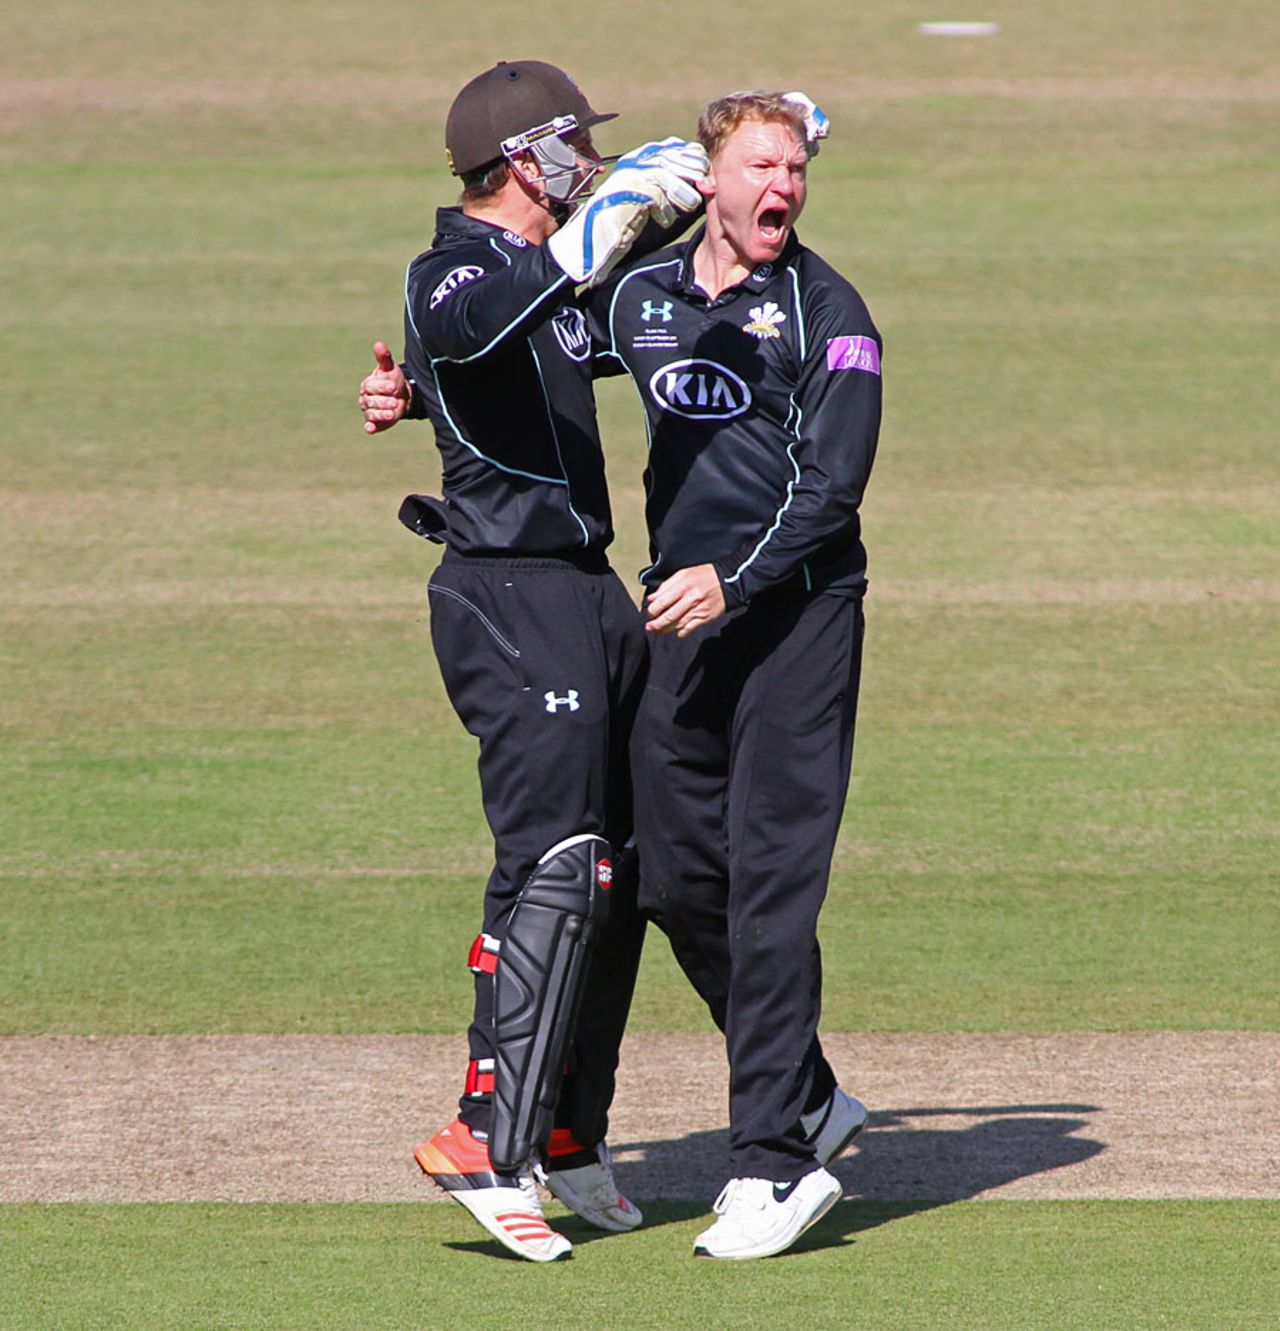 Gareth Batty shows his emotions, Gloucestershire v Surrey, Royal London Cup final, Lord's, September 19, 2015